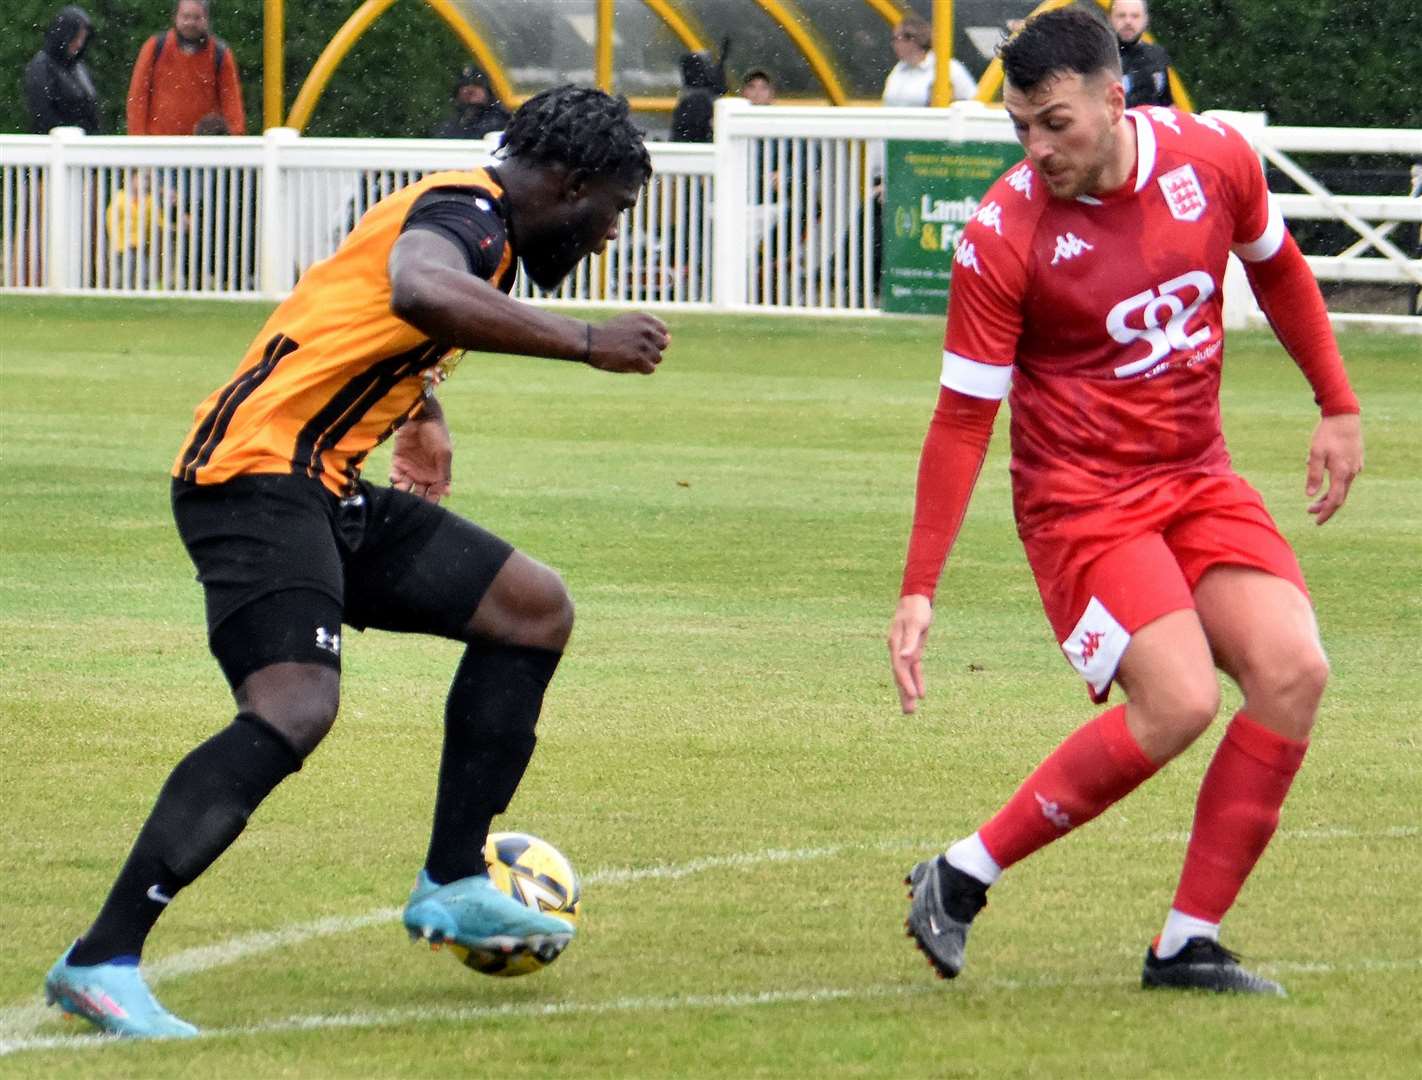 Folkestone striker David Smith attempts to cut inside Faversham defender Jake McIntyre during Invicta’s weekend 6-1 friendly win at Cheriton Road. Picture: Randolph File